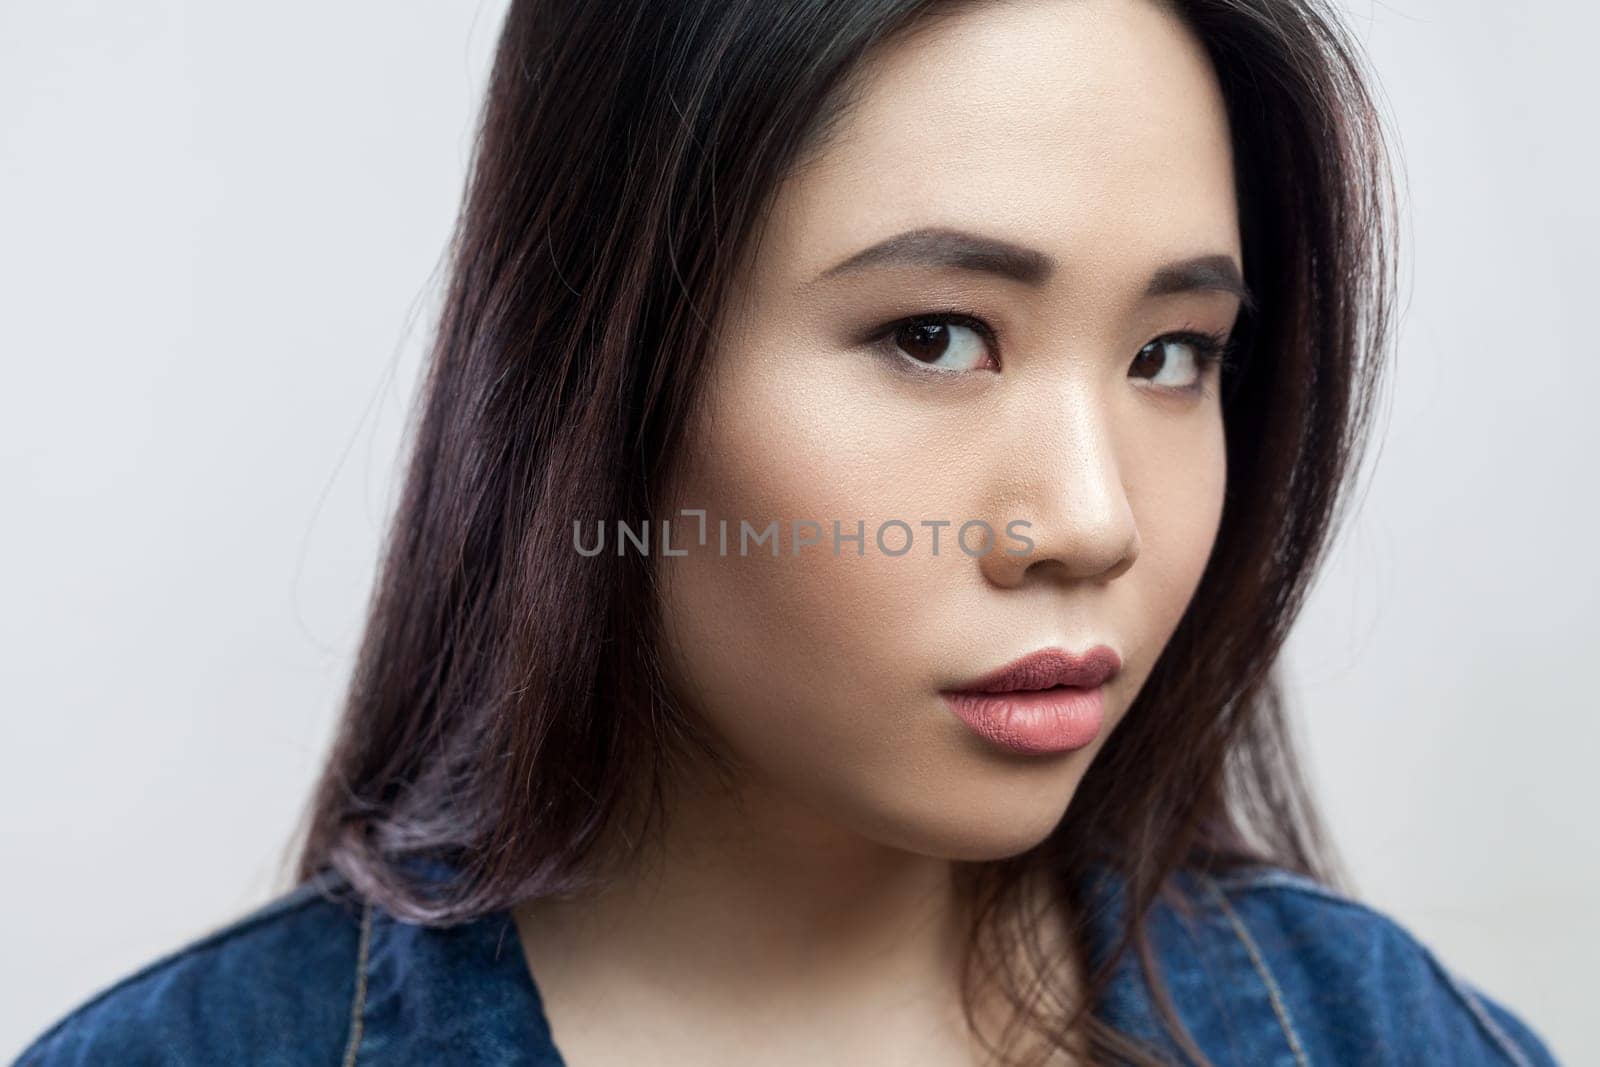 Closeup portrait of serious concentrated beautiful young adult brunette woman with makeup and long hair, looking at camera. Indoor studio shot isolated on gray background.